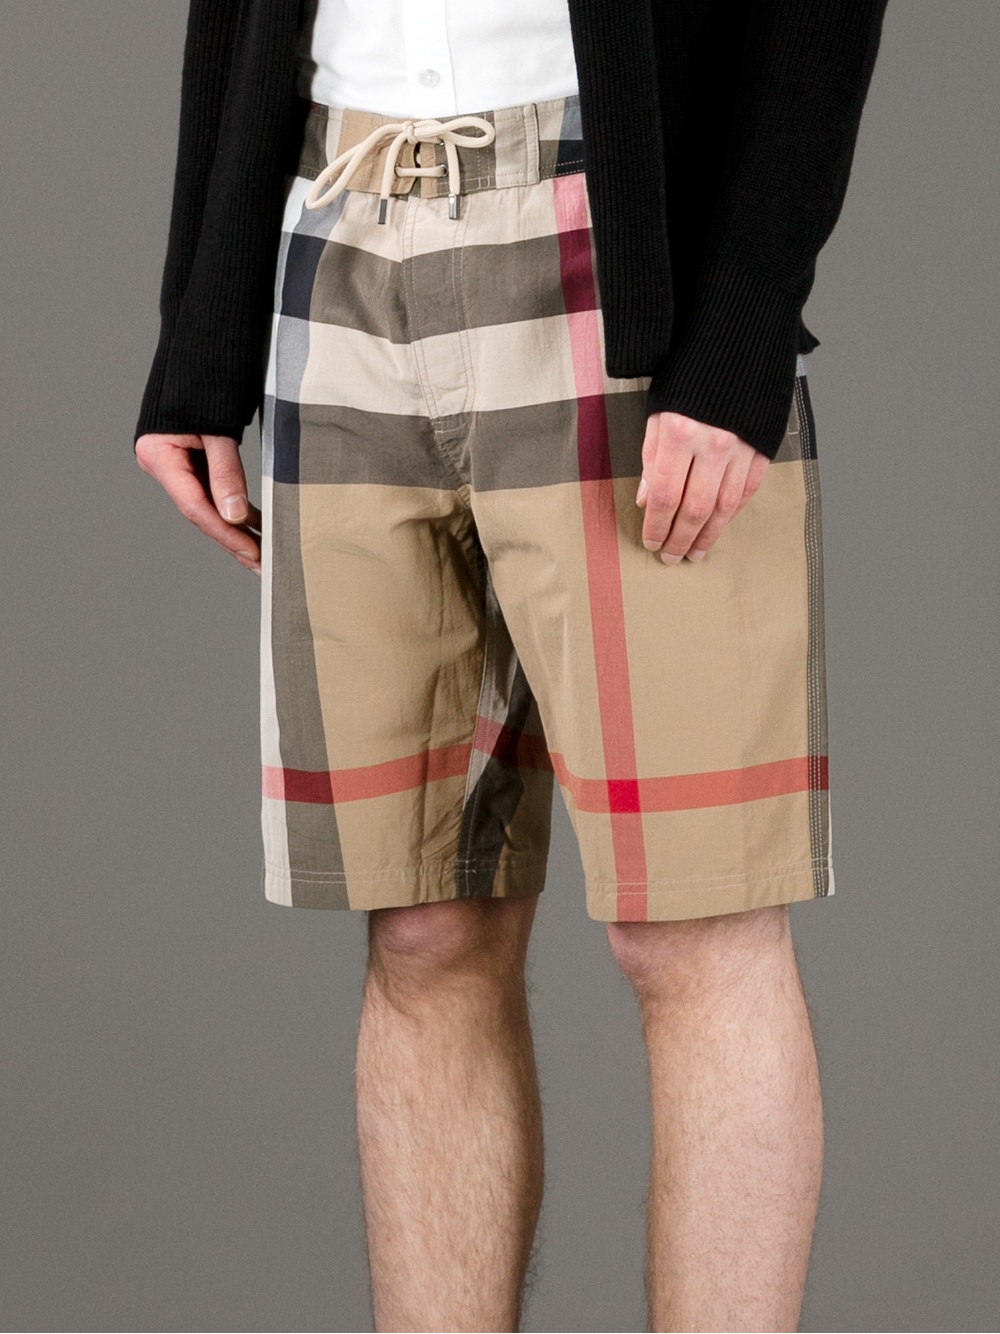 Burberry Brit Checked Shorts in Beige (Natural) for Men - Lyst